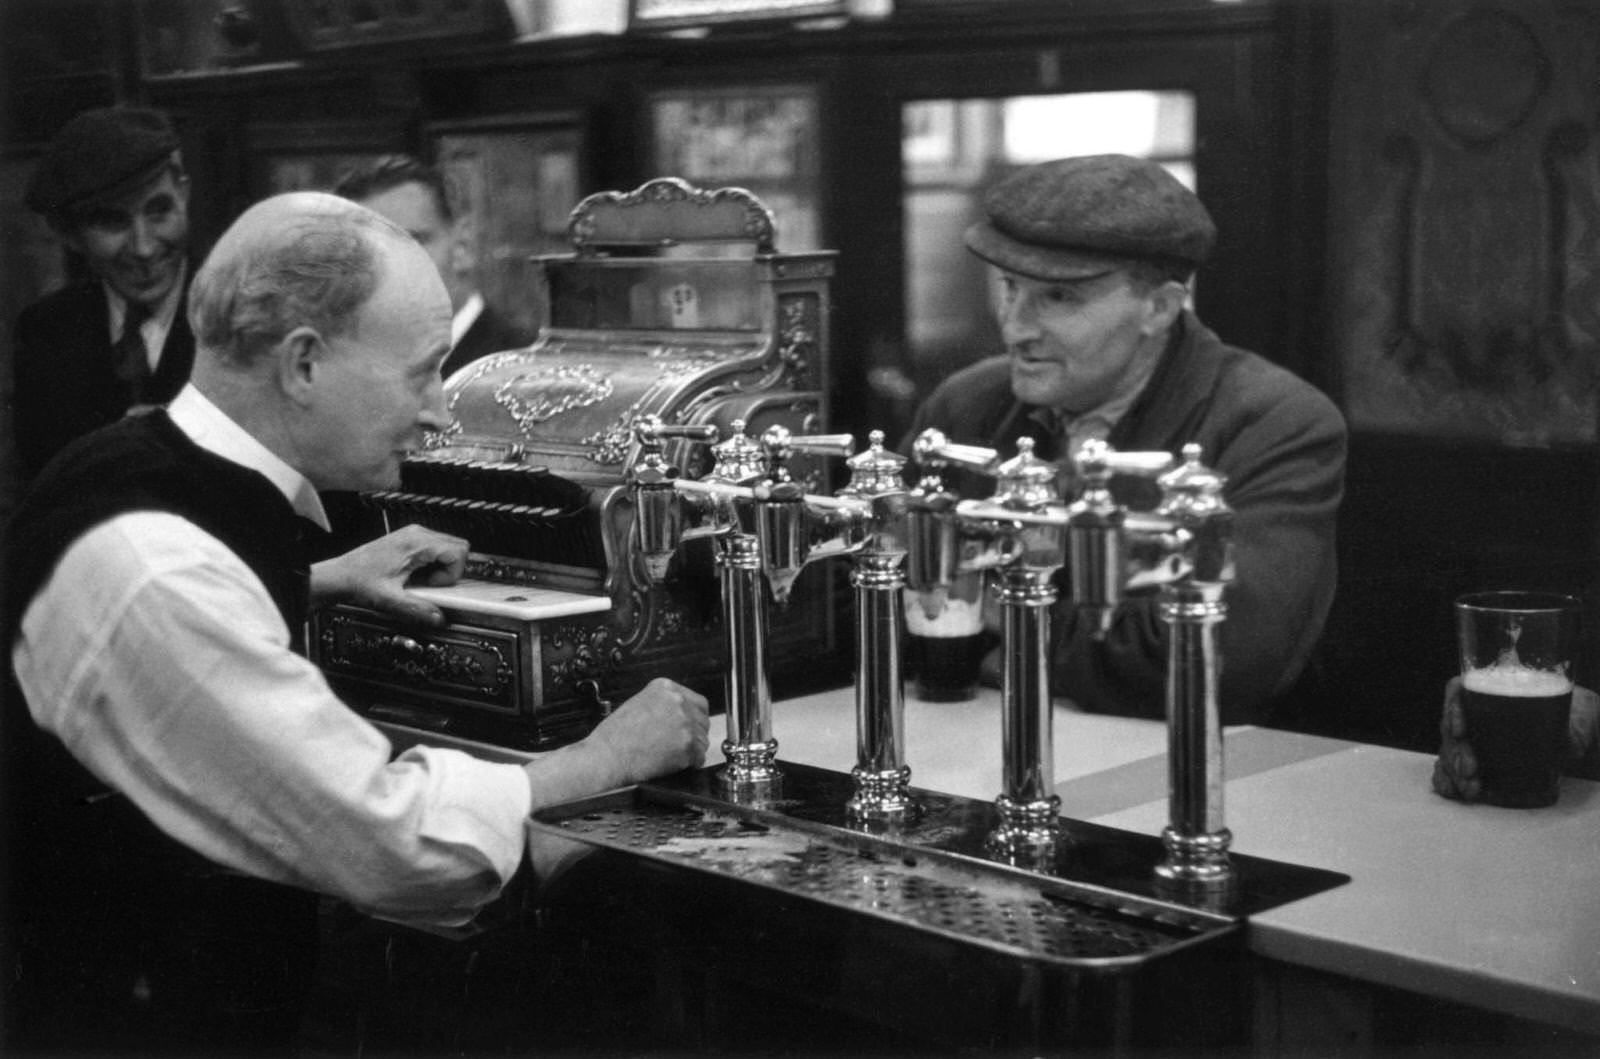 A barman at work in the Gorbals district of Glasgow, 1948